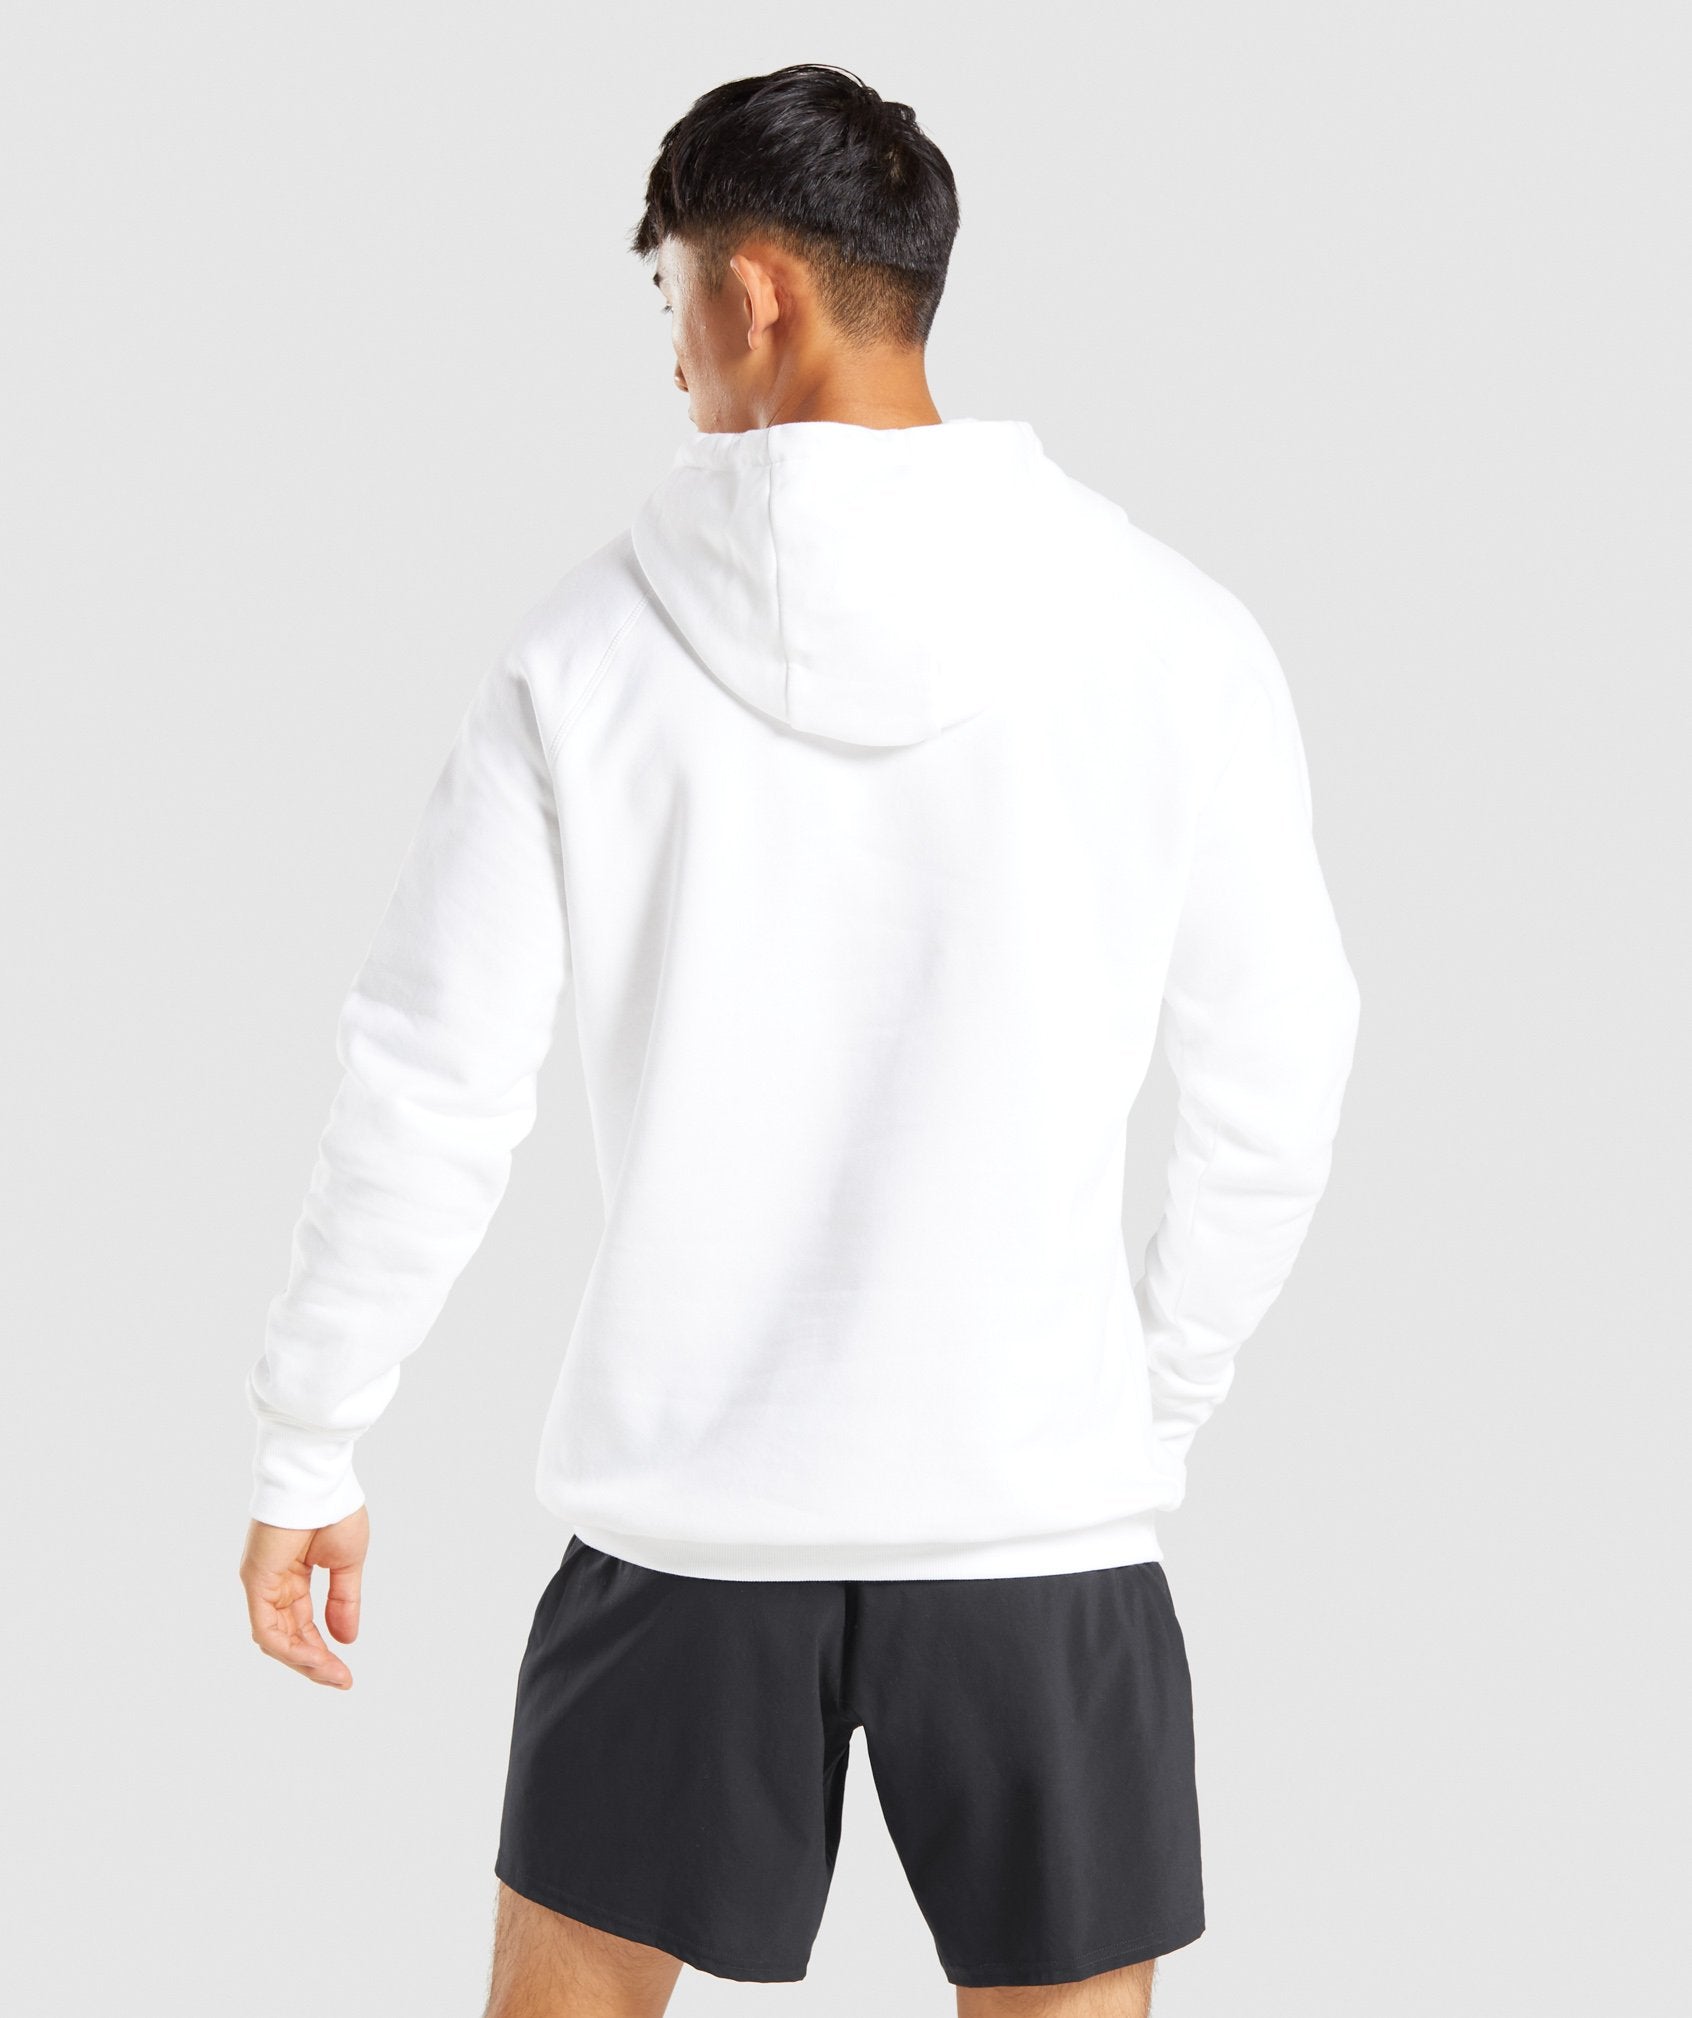 Infill Hoodie in White - view 2